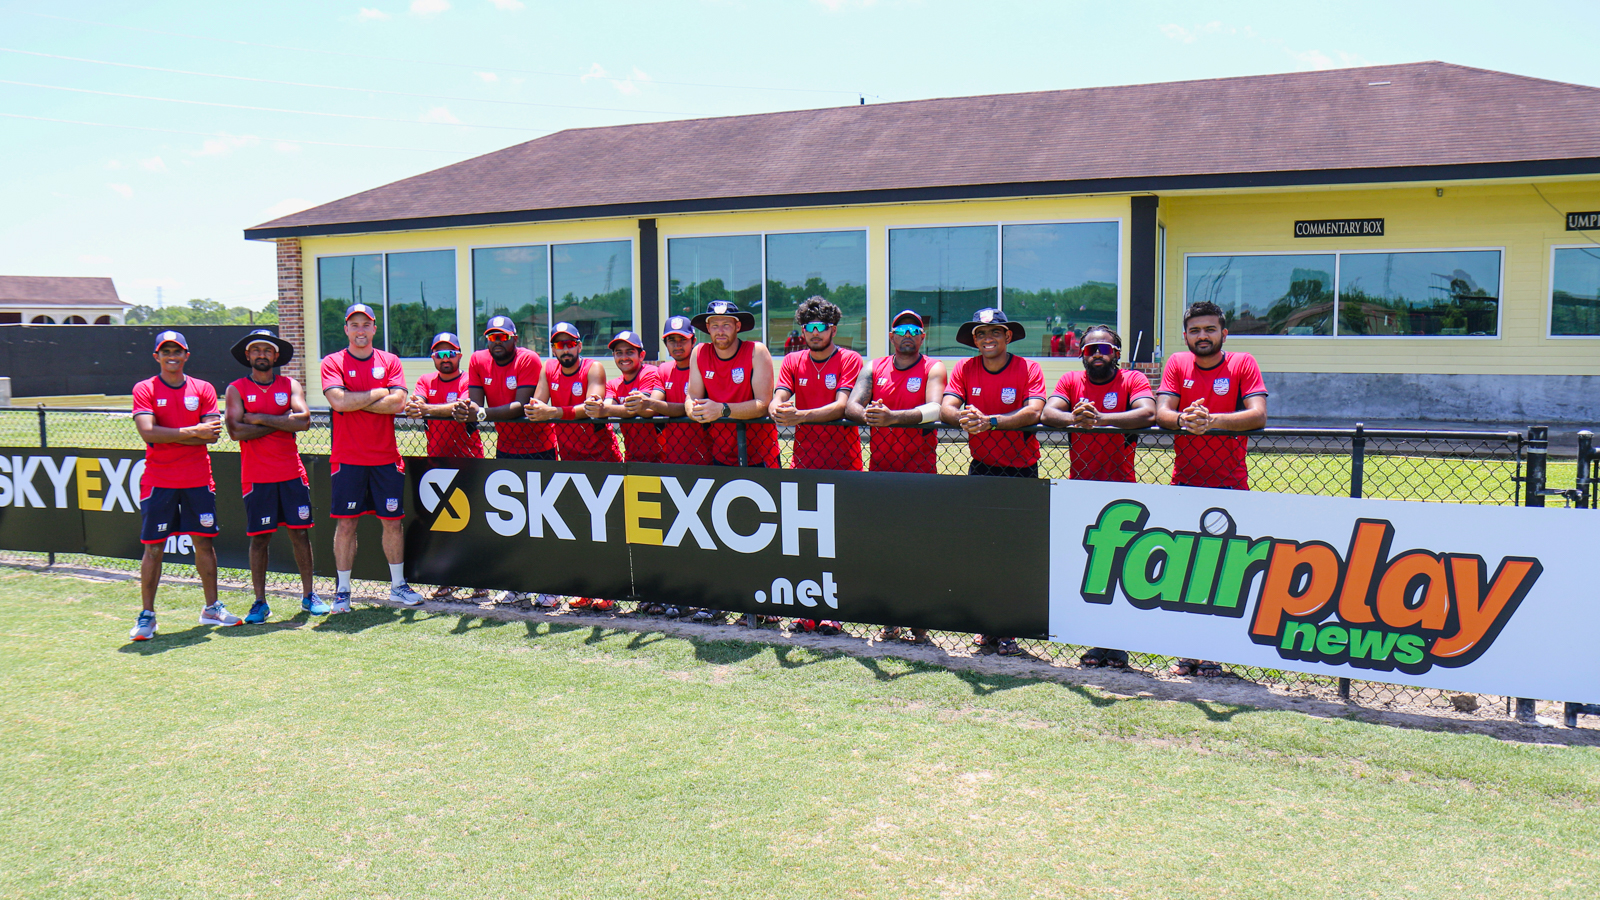 Skyexch.net Partners with USA Cricket to sponsor ICC Cricket World Cup League 2 series in Texas